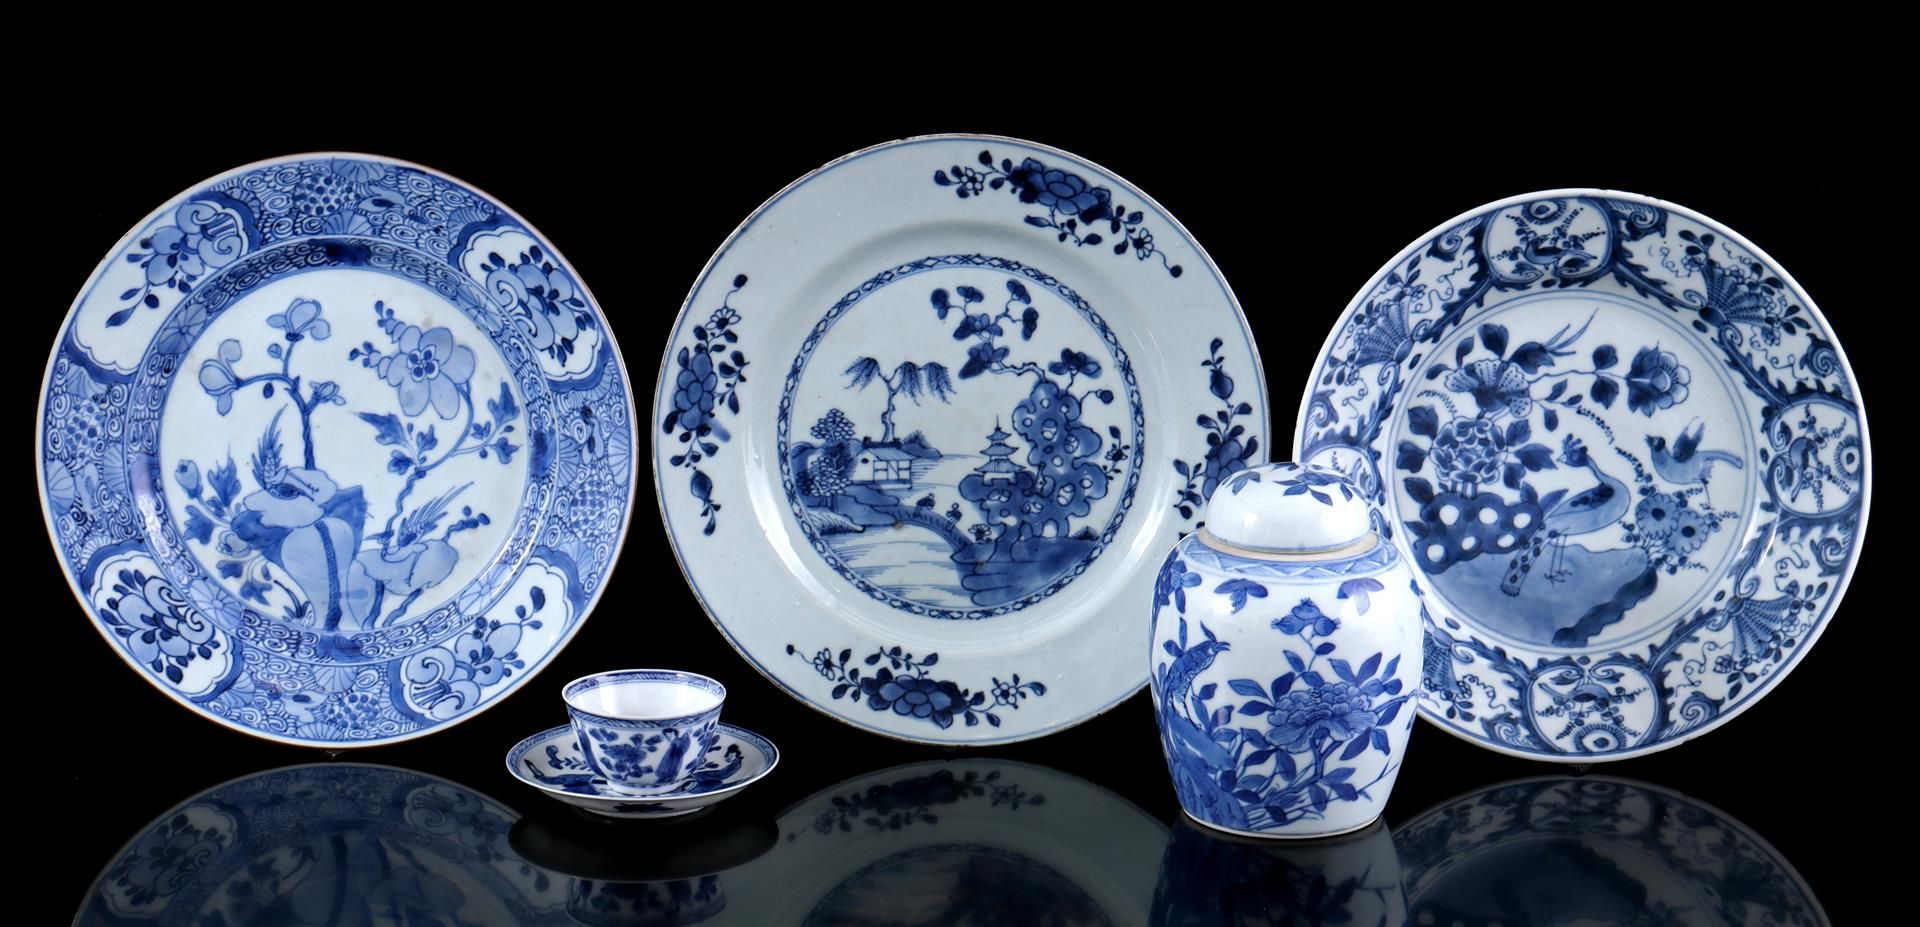 3 porcelain dishes with floral and landscape decor and birds, China ca. 1800